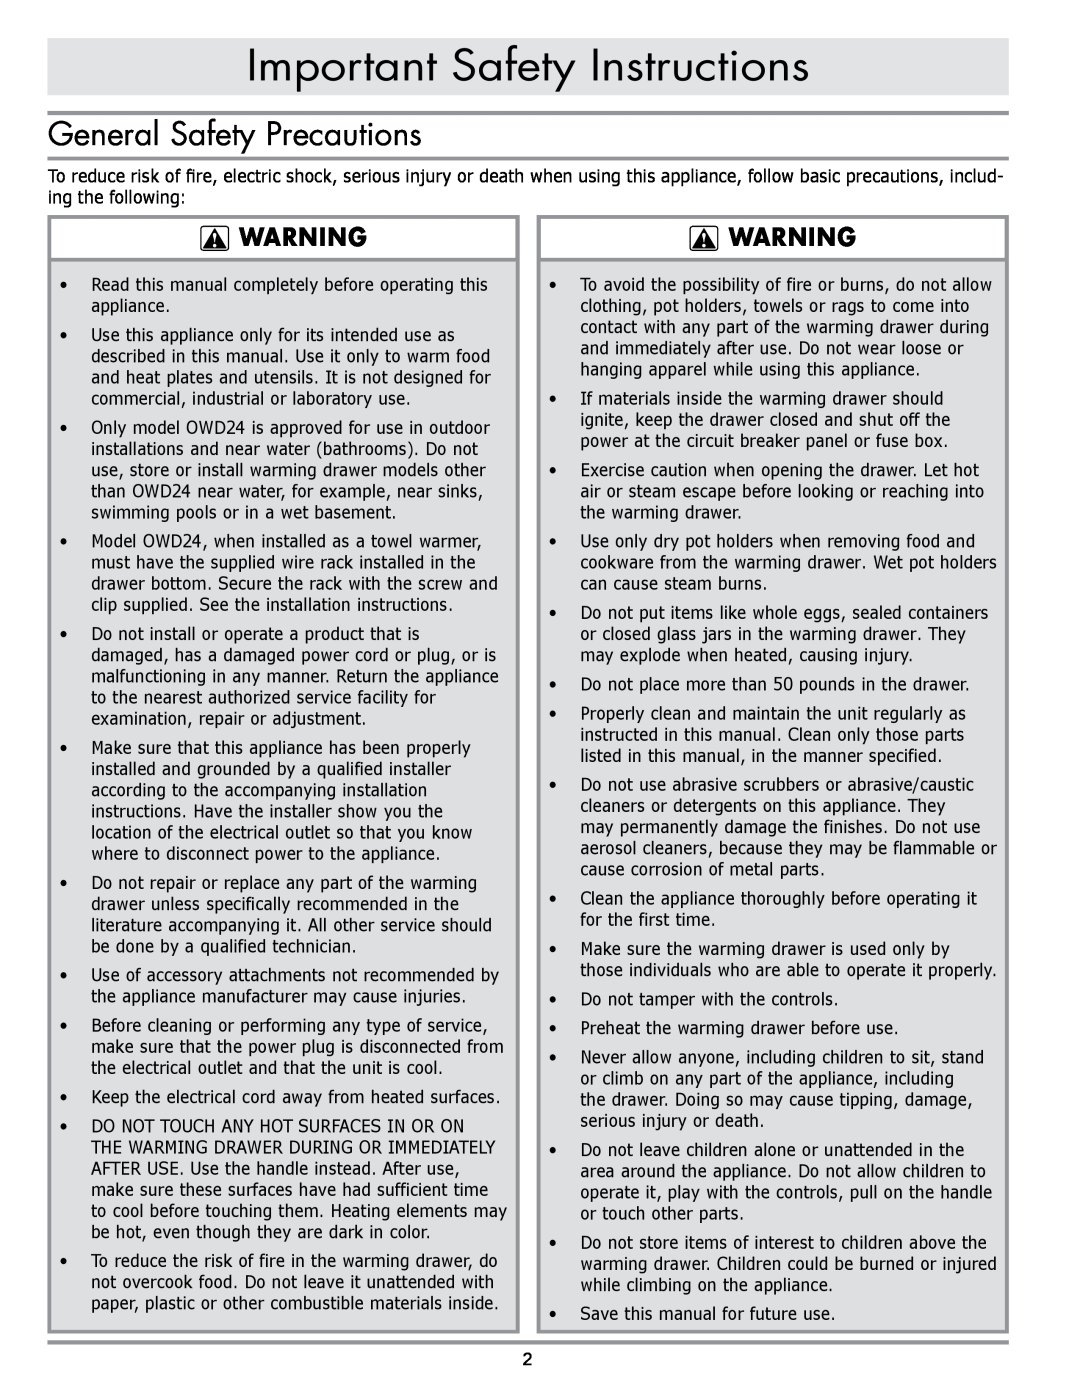 Dacor ERWD30 manual Important Safety Instructions, General Safety Precautions 